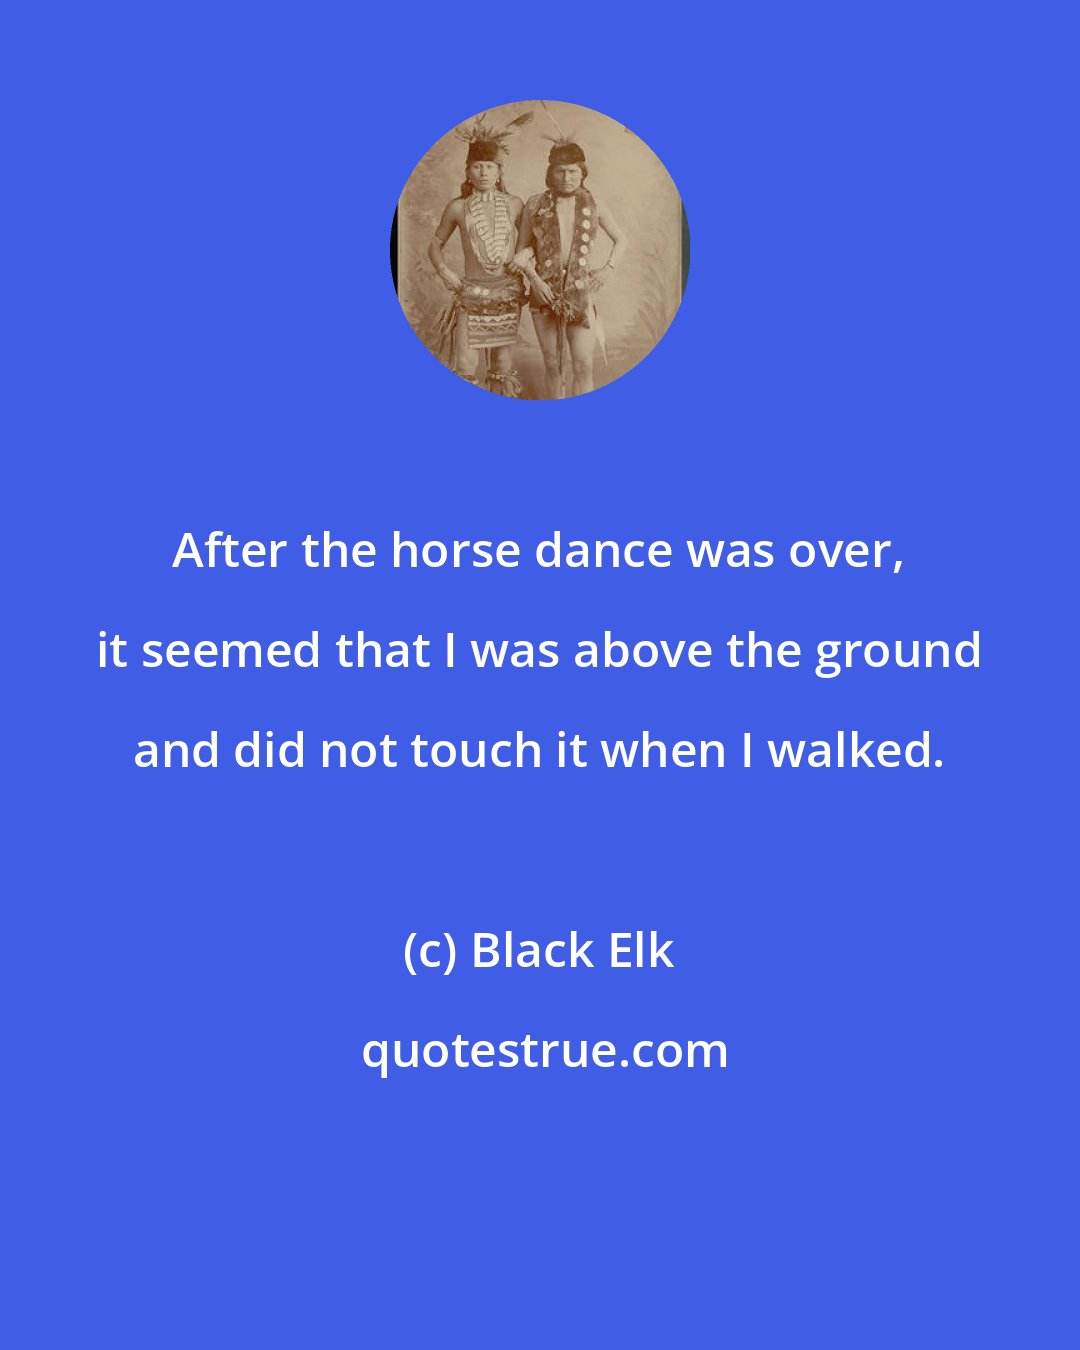 Black Elk: After the horse dance was over, it seemed that I was above the ground and did not touch it when I walked.